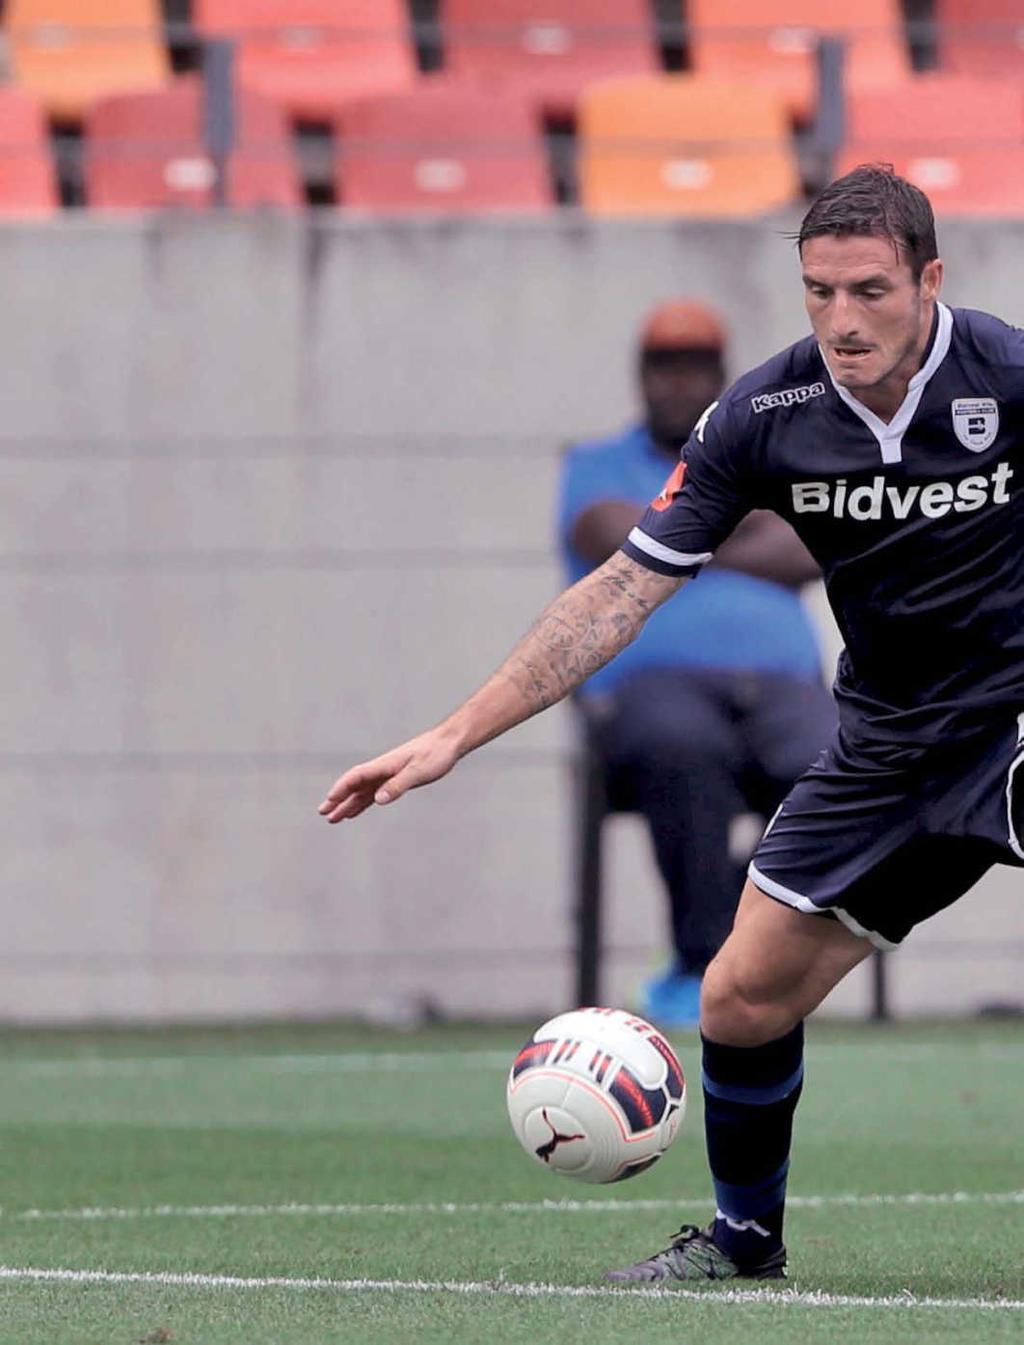 PROFILE JAMES KEENE CLEVER MOVE SOUTH Thirteen clubs in 14 years is some journey. But Englishman James Keene has good reasons for moving to Bidvest Wits.